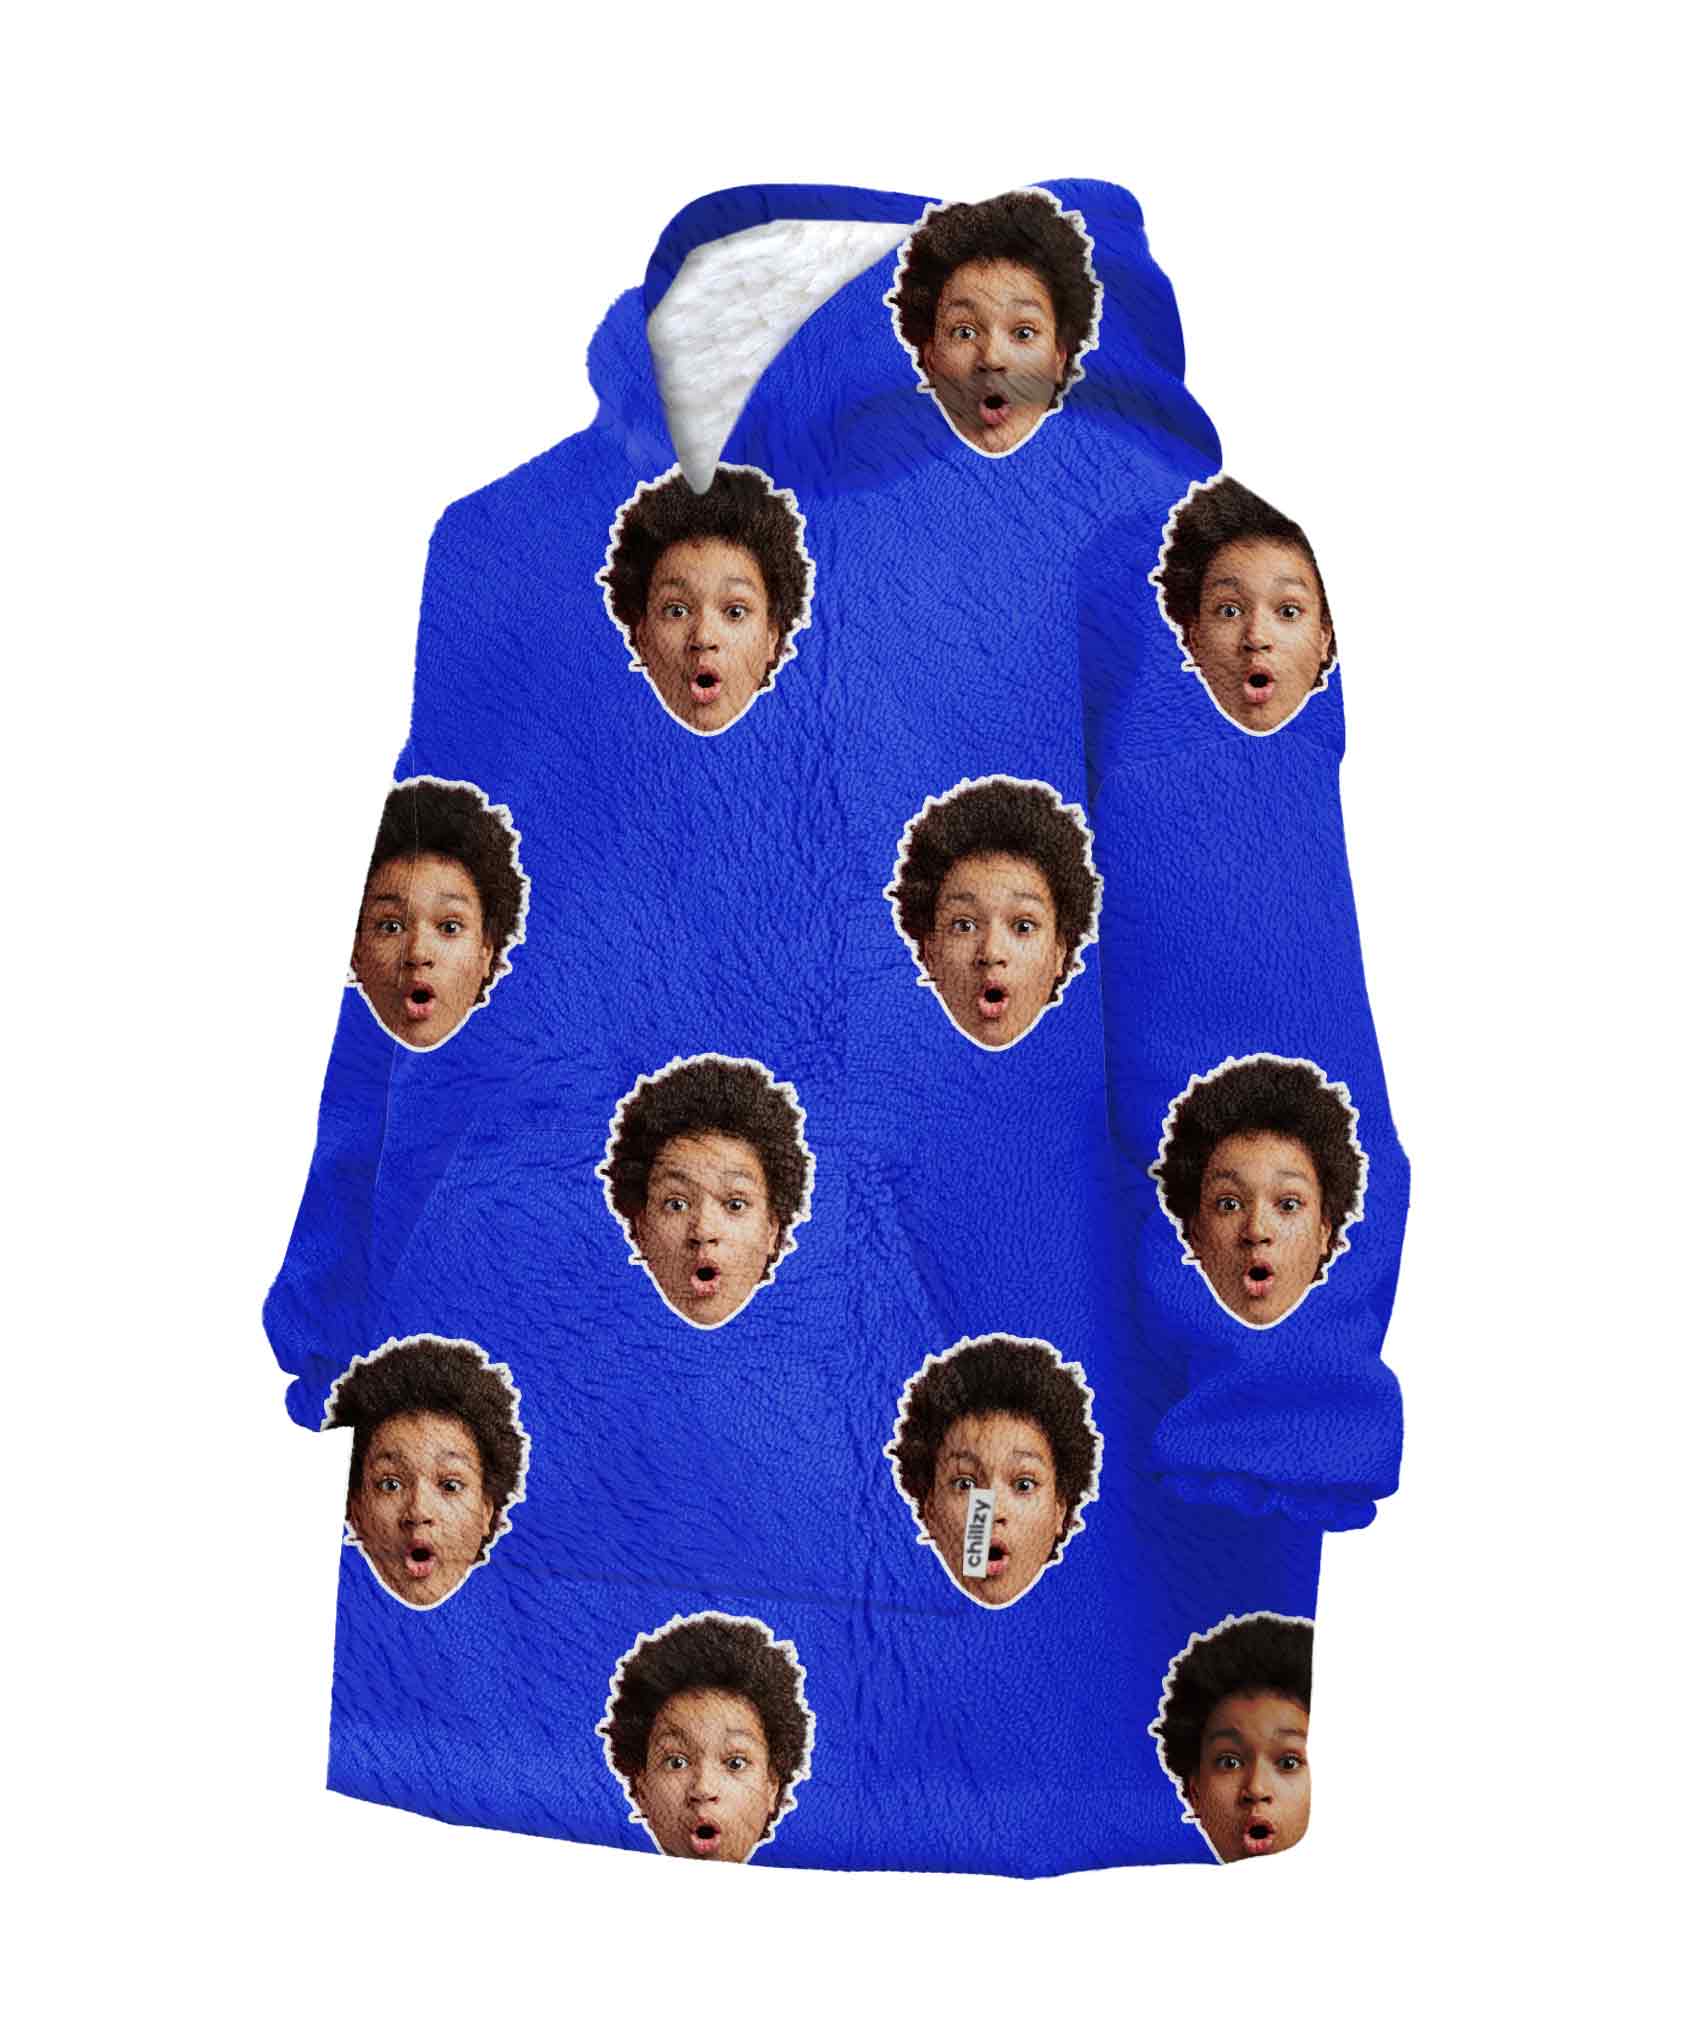 Your Face Chillzy Kids Hoodie Blanket